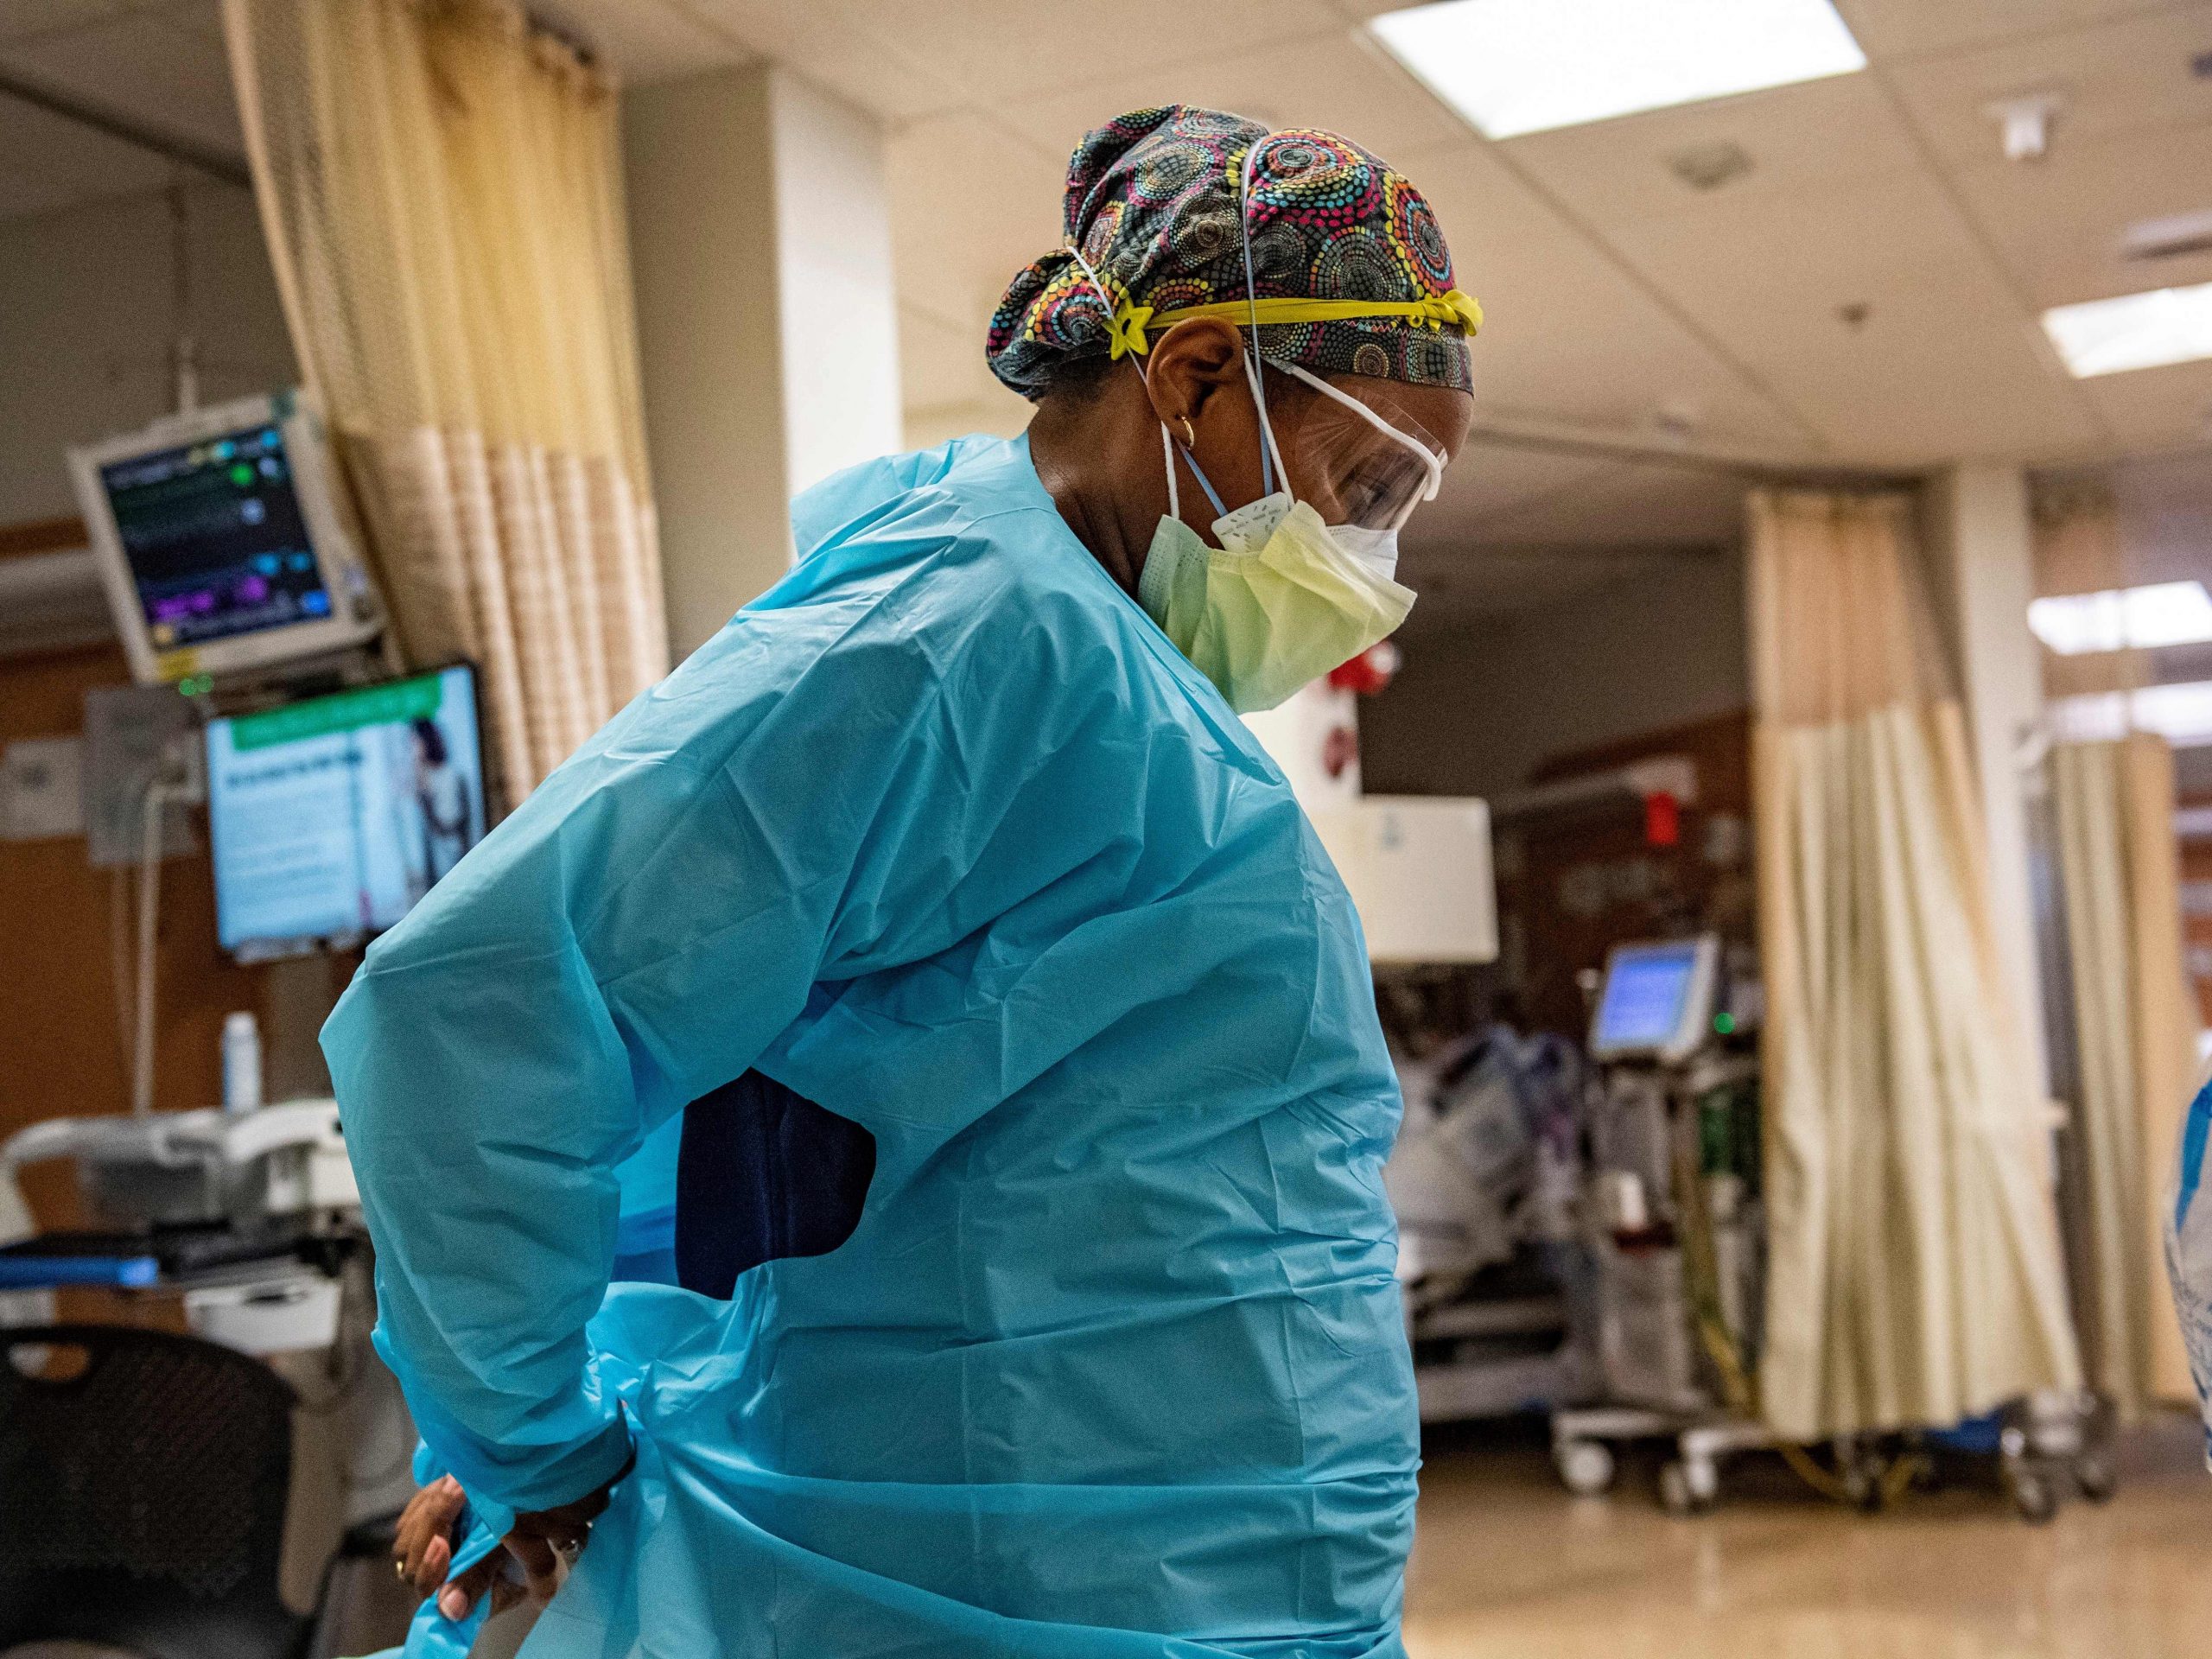 A medical worker at UMass Memorial Medical Center ties her PPE around her back while looking down.